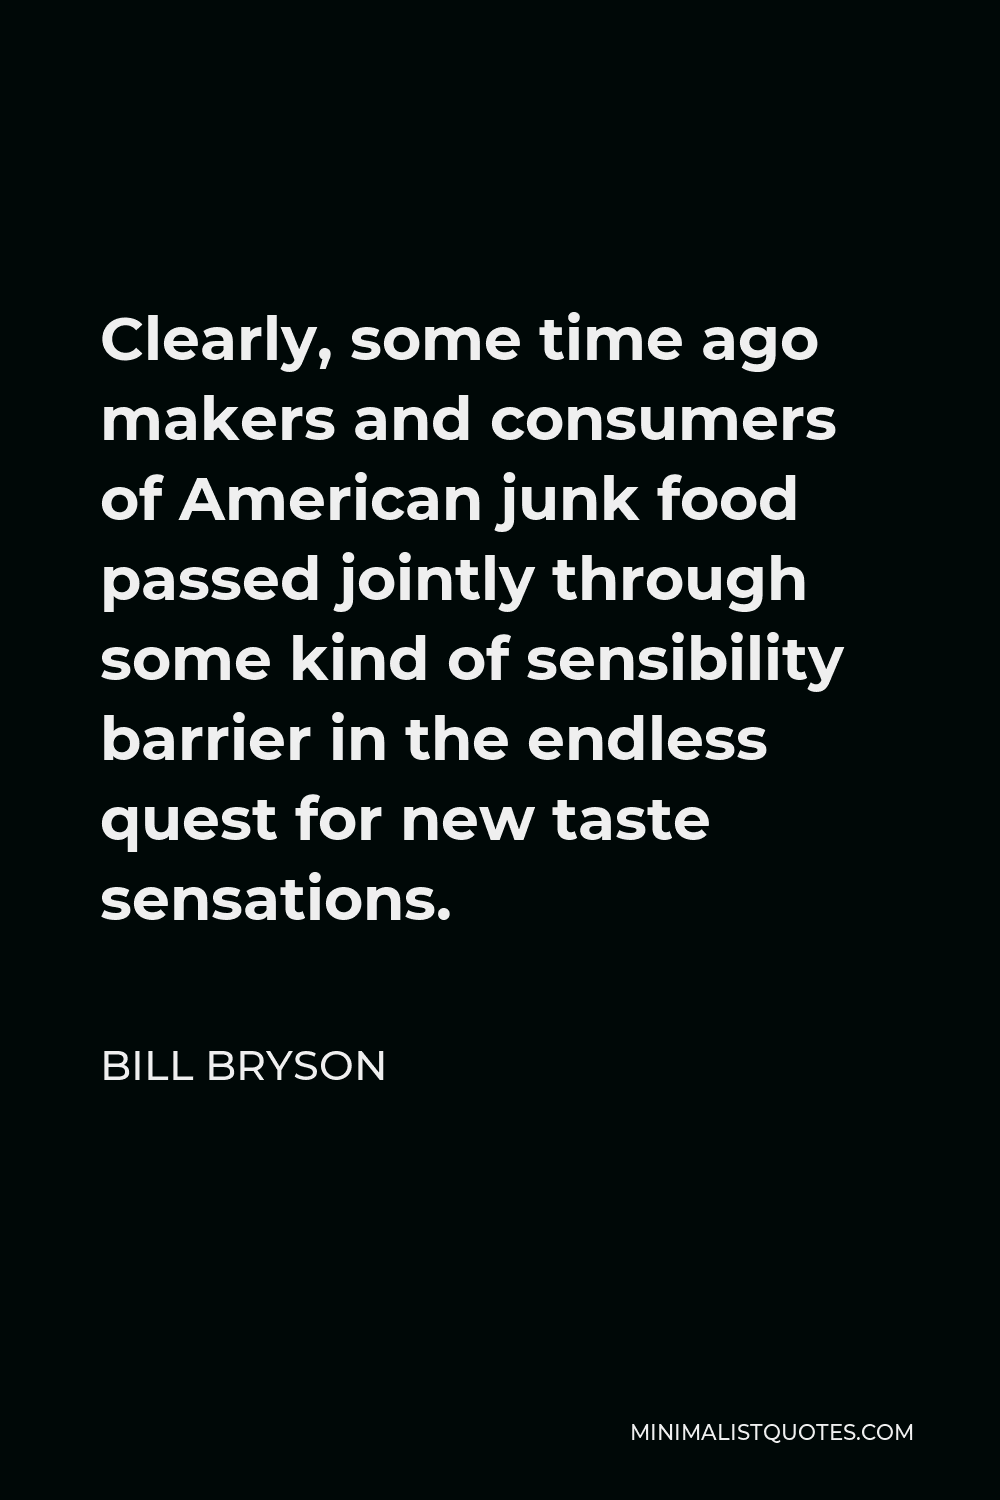 Bill Bryson Quote - Clearly, some time ago makers and consumers of American junk food passed jointly through some kind of sensibility barrier in the endless quest for new taste sensations.